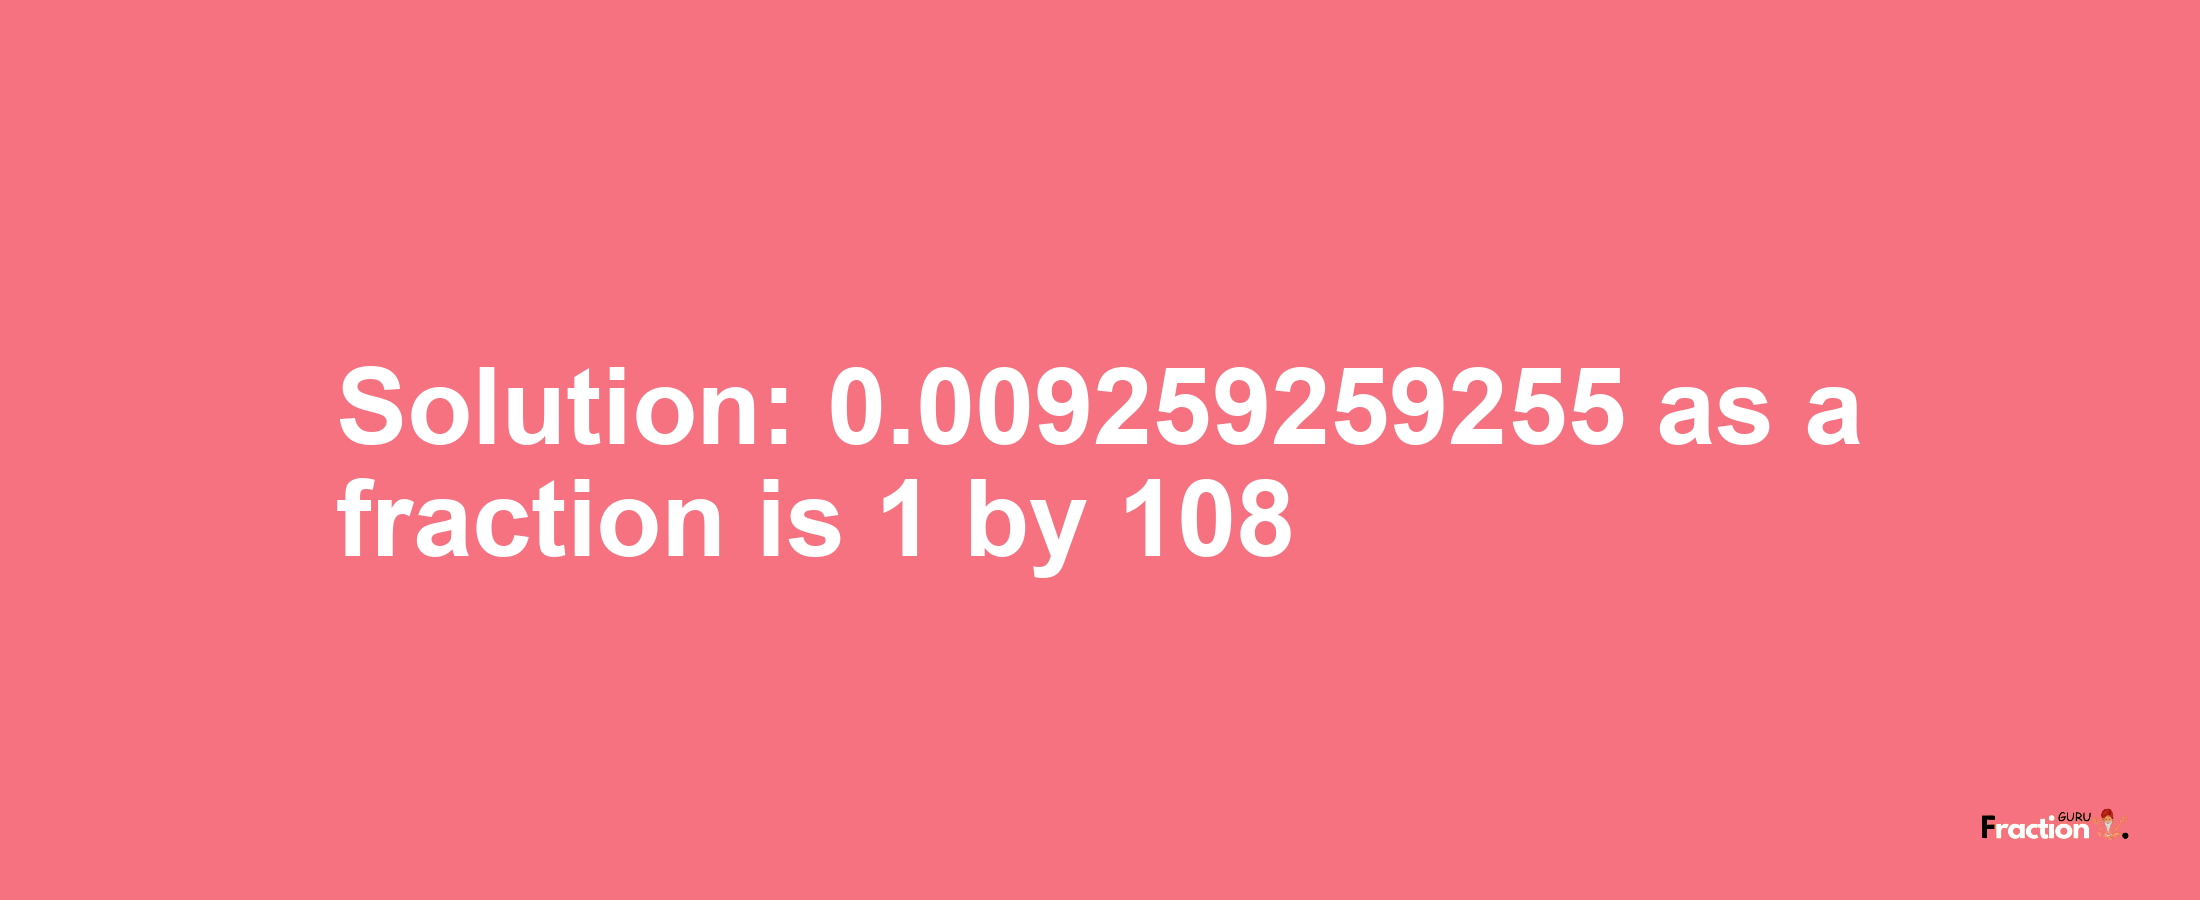 Solution:0.009259259255 as a fraction is 1/108